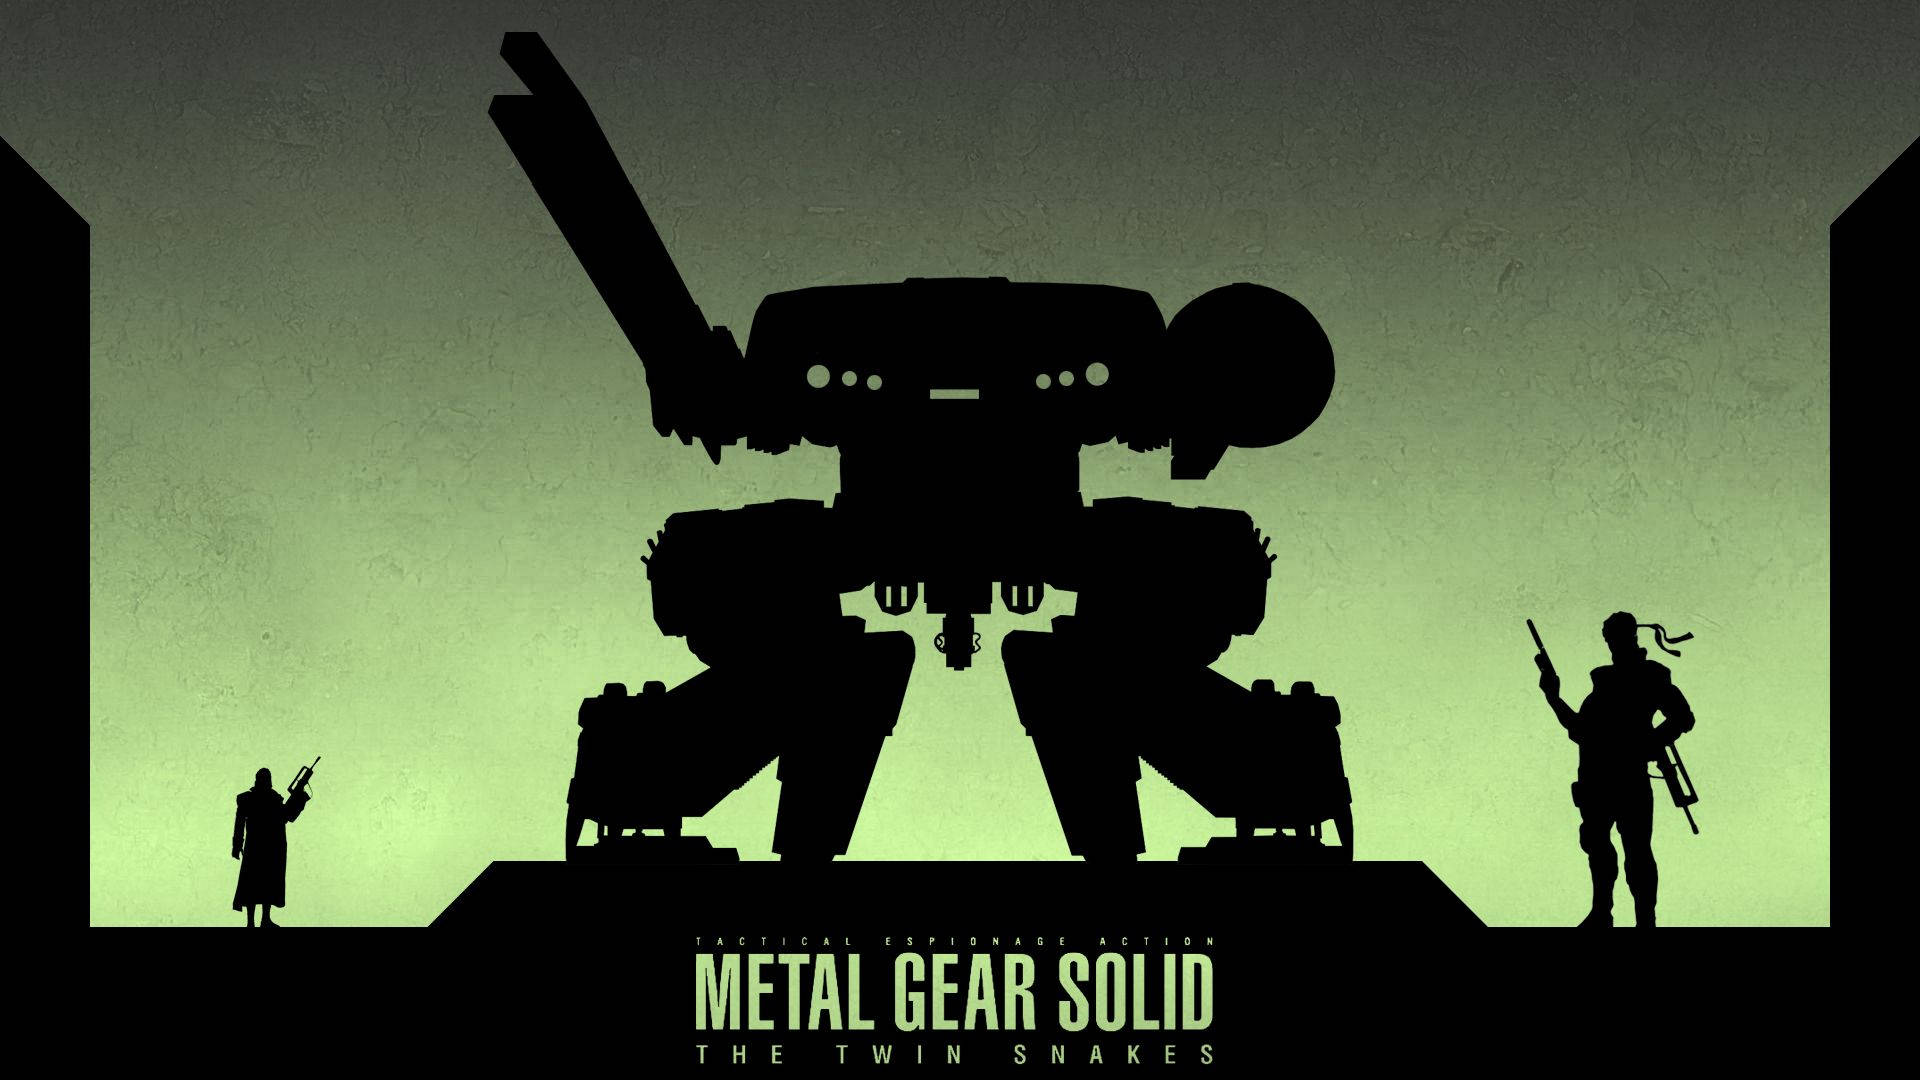 Metal Gear Solid: The Twin Snakes Wallpaper